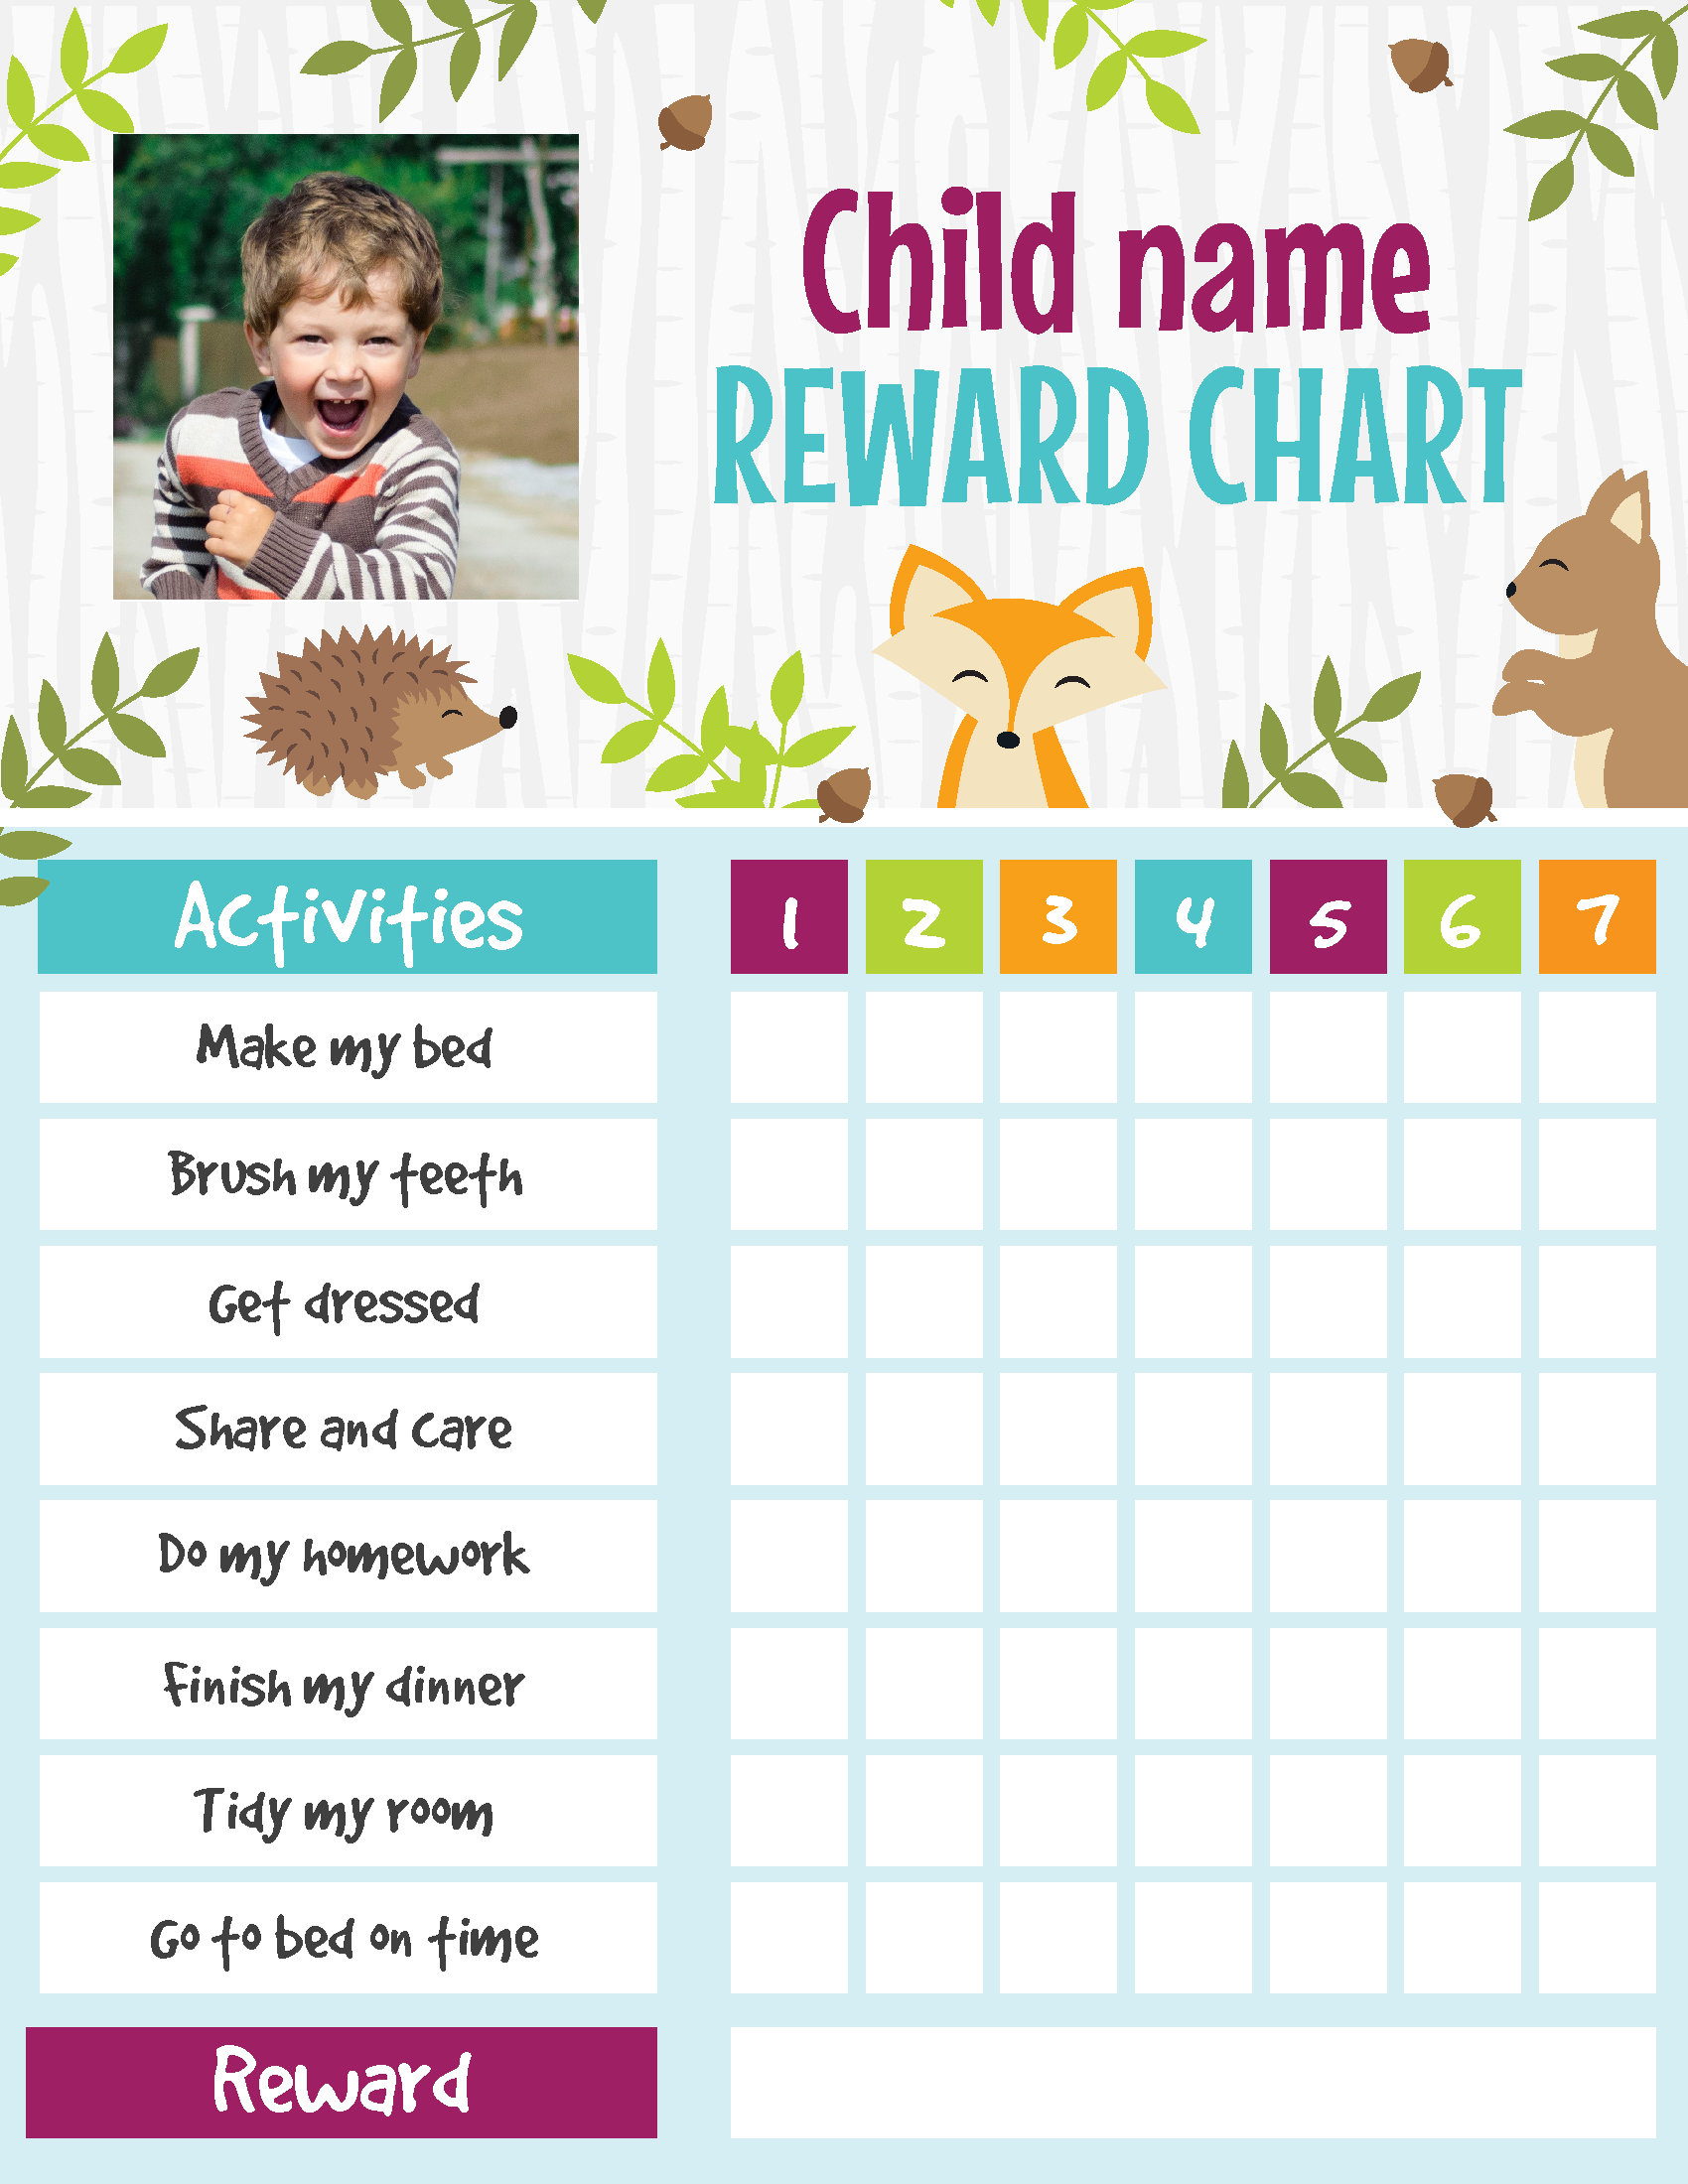 personalized-reward-chart-for-kids-printable-reward-chart-reward-chart